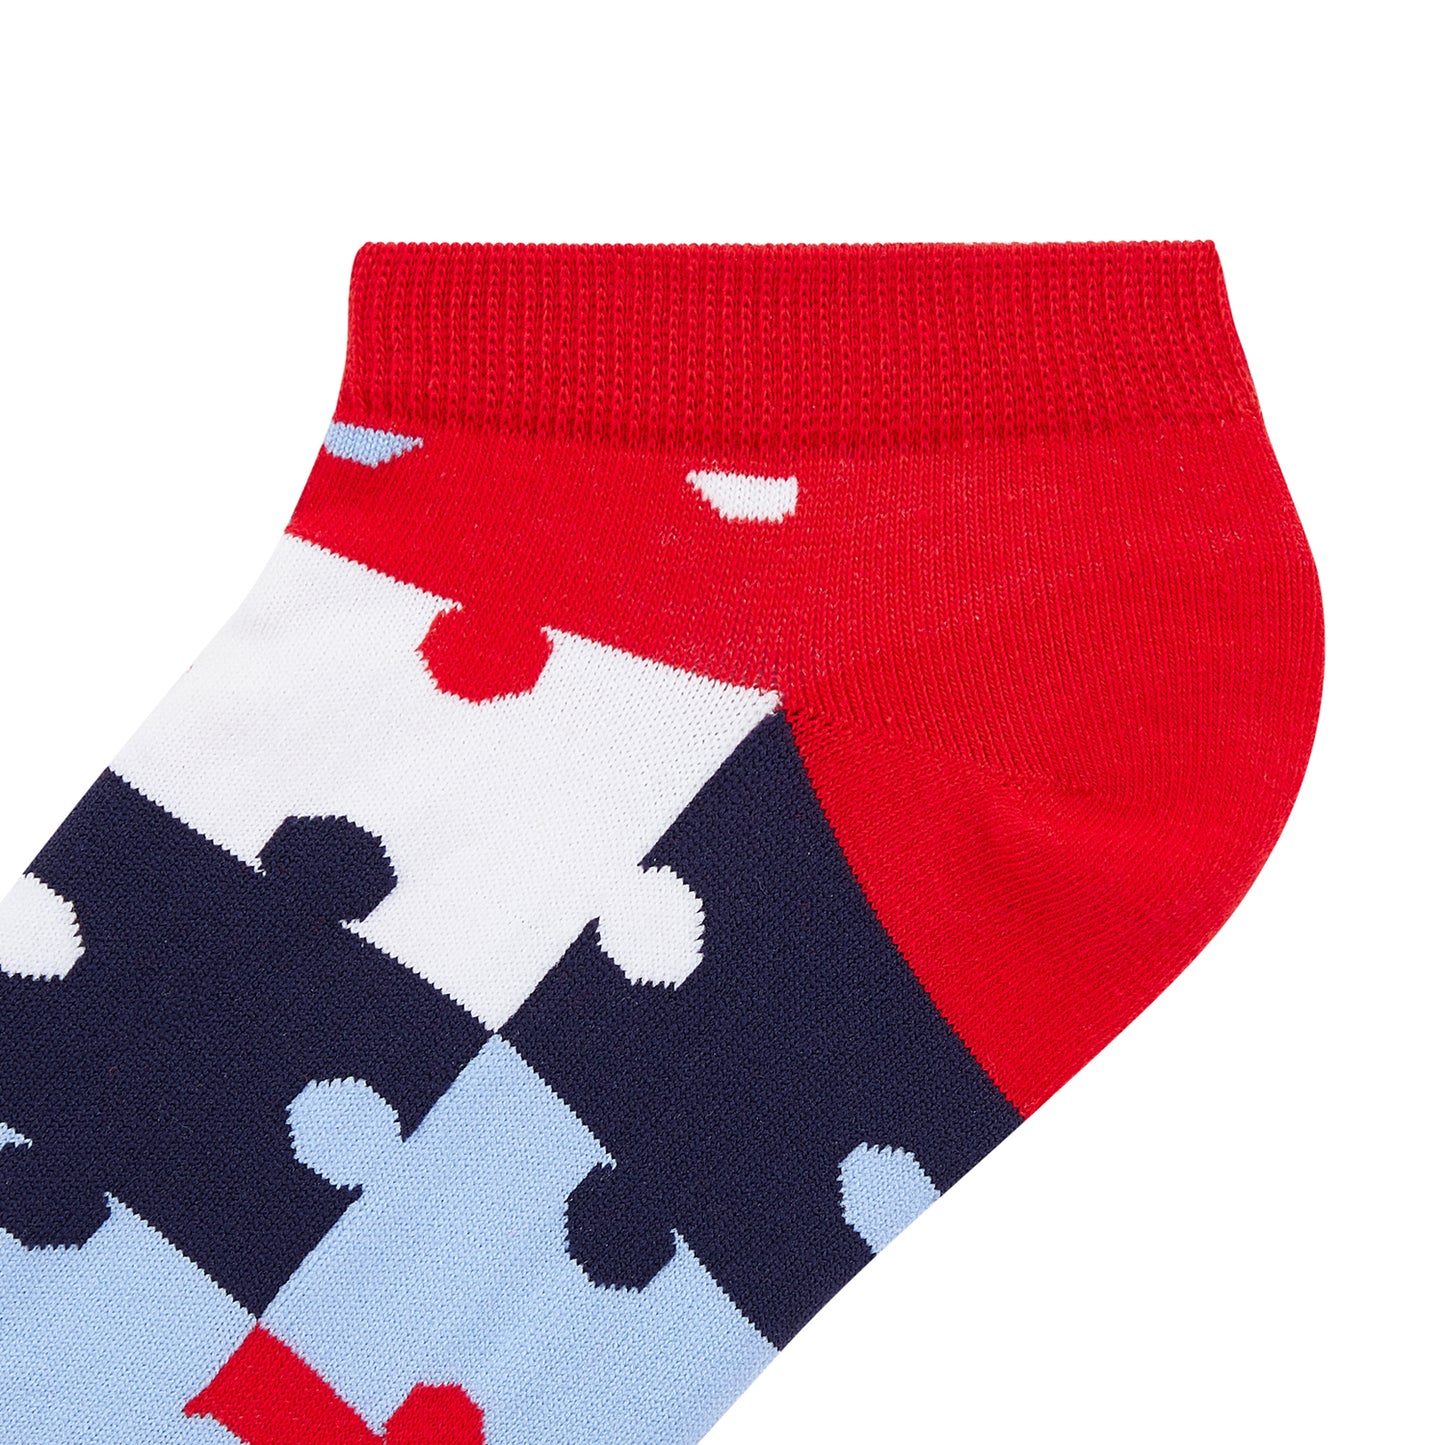 Puzzle Printed Ankle Socks - IDENTITY Apparel Shop